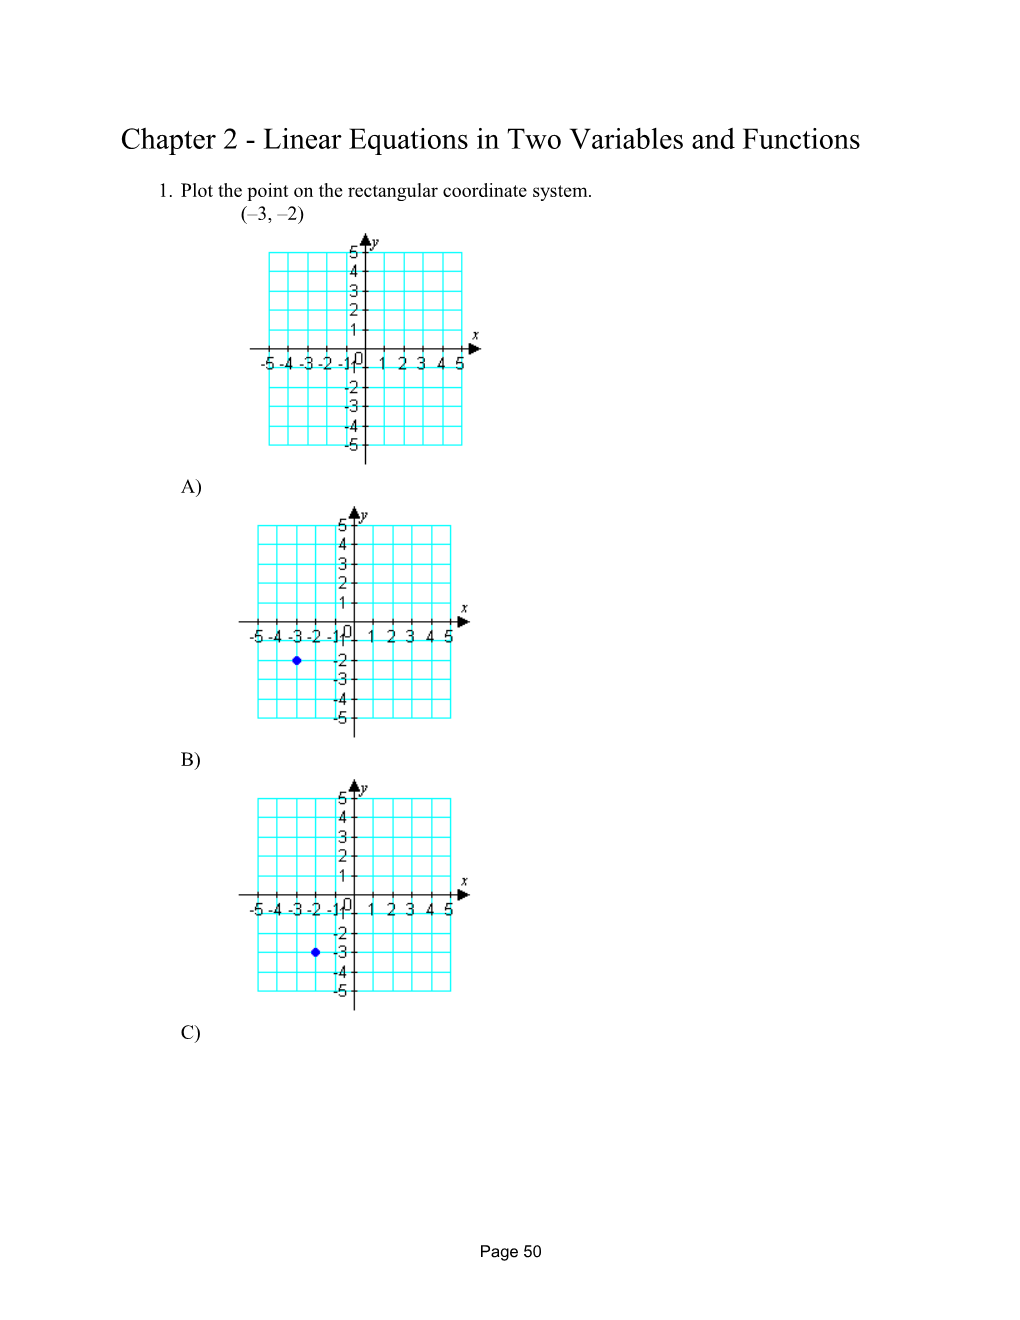 Chapter 2 - Linear Equations in Two Variables and Functions